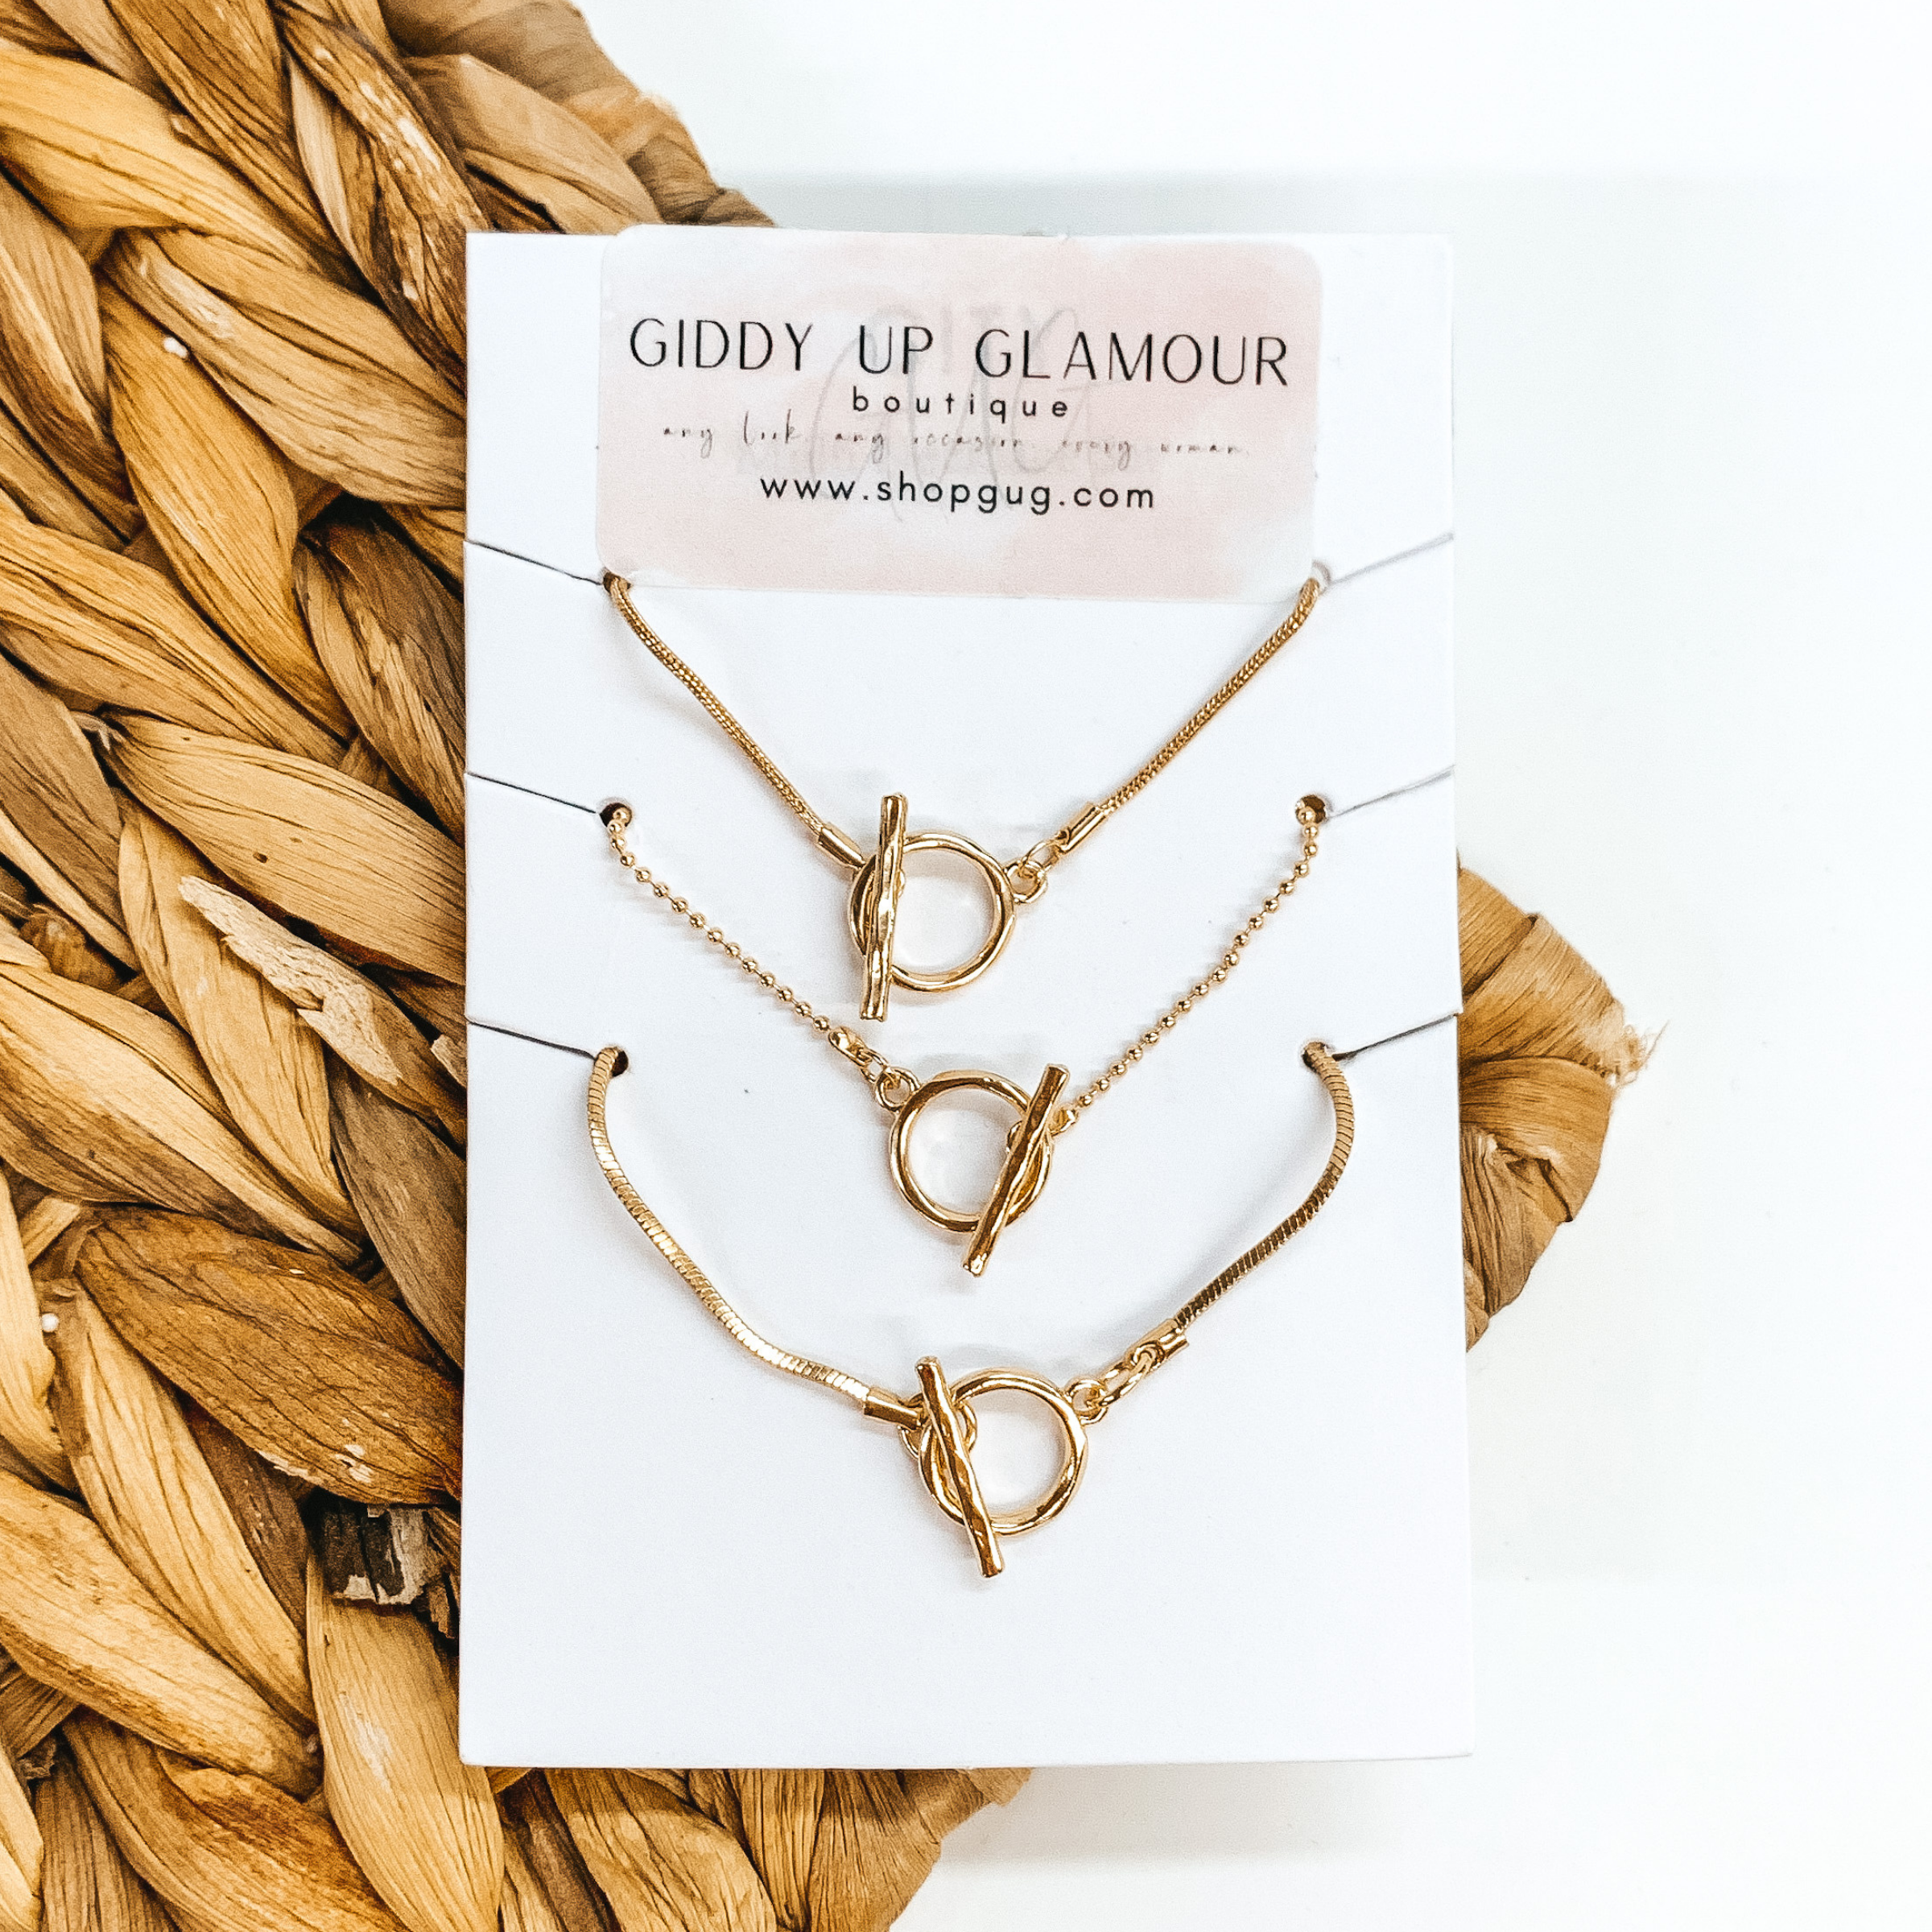 Set of Three | Gold Necklace Set with Toggle Clasps - Giddy Up Glamour Boutique